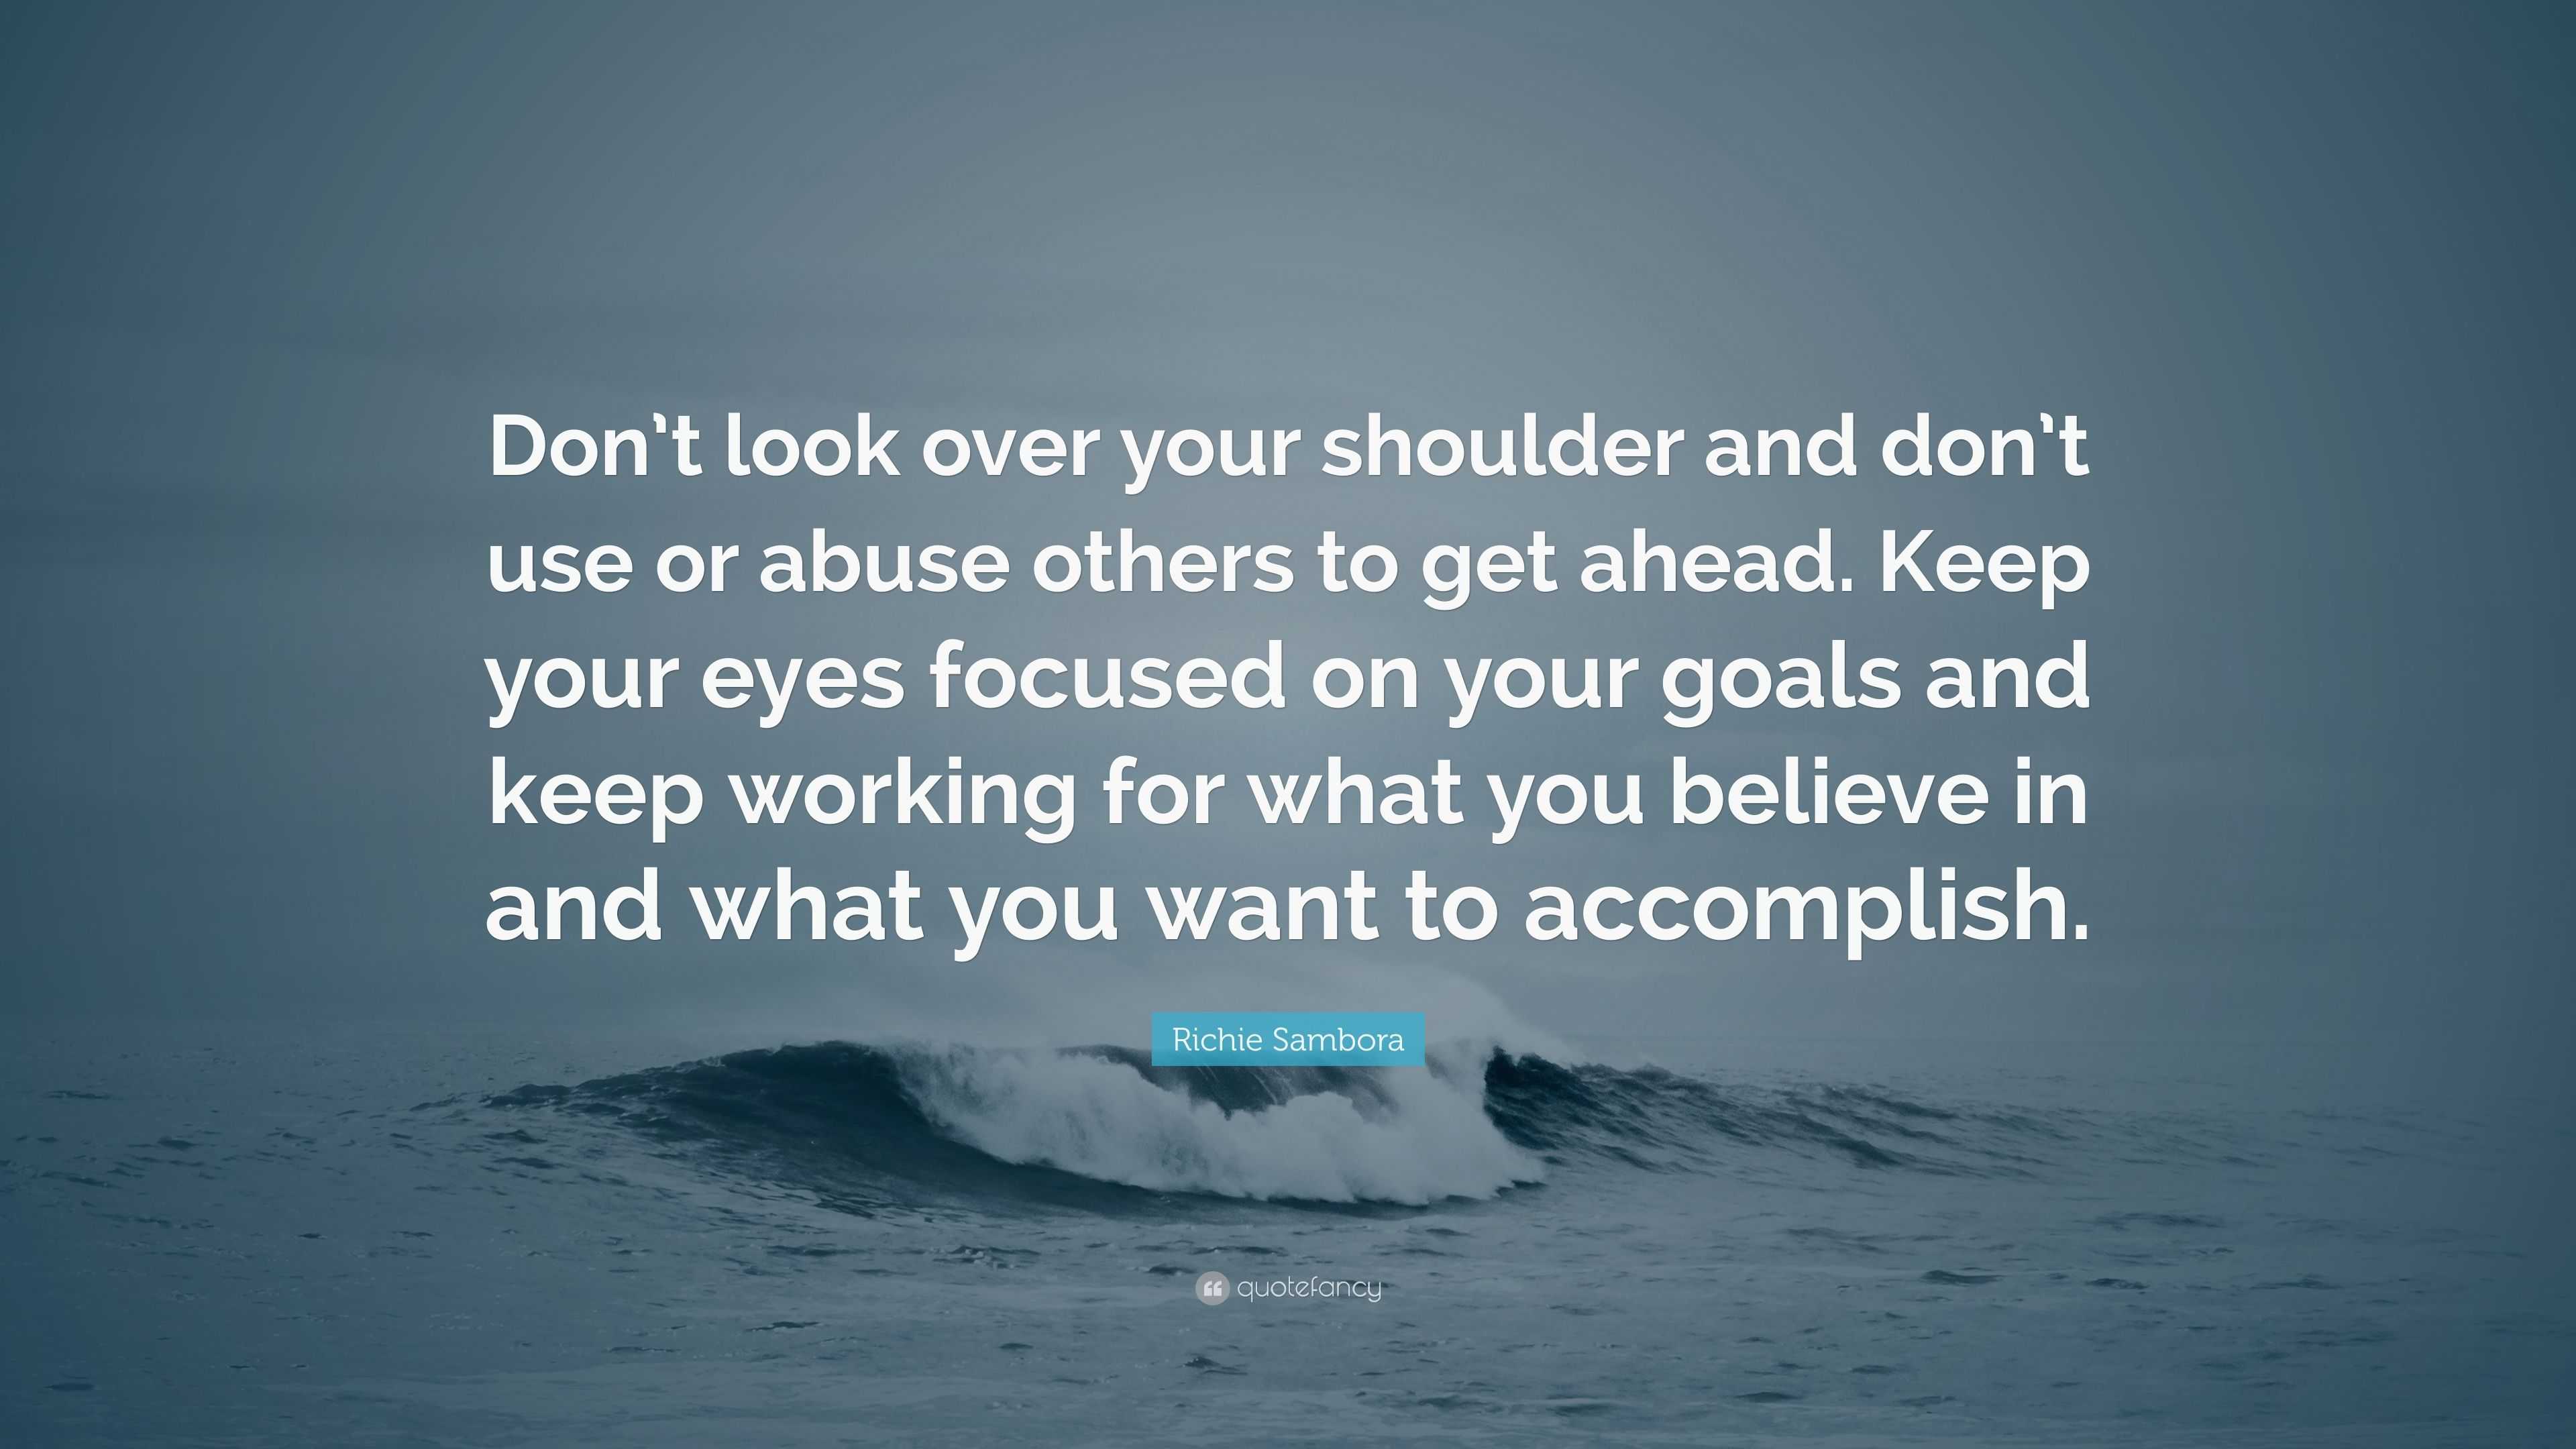 Richie Sambora Quote Don T Look Over Your Shoulder And Don T Use Or Abuse Others To Get Ahead Keep Your Eyes Focused On Your Goals And Keep 7 Wallpapers Quotefancy